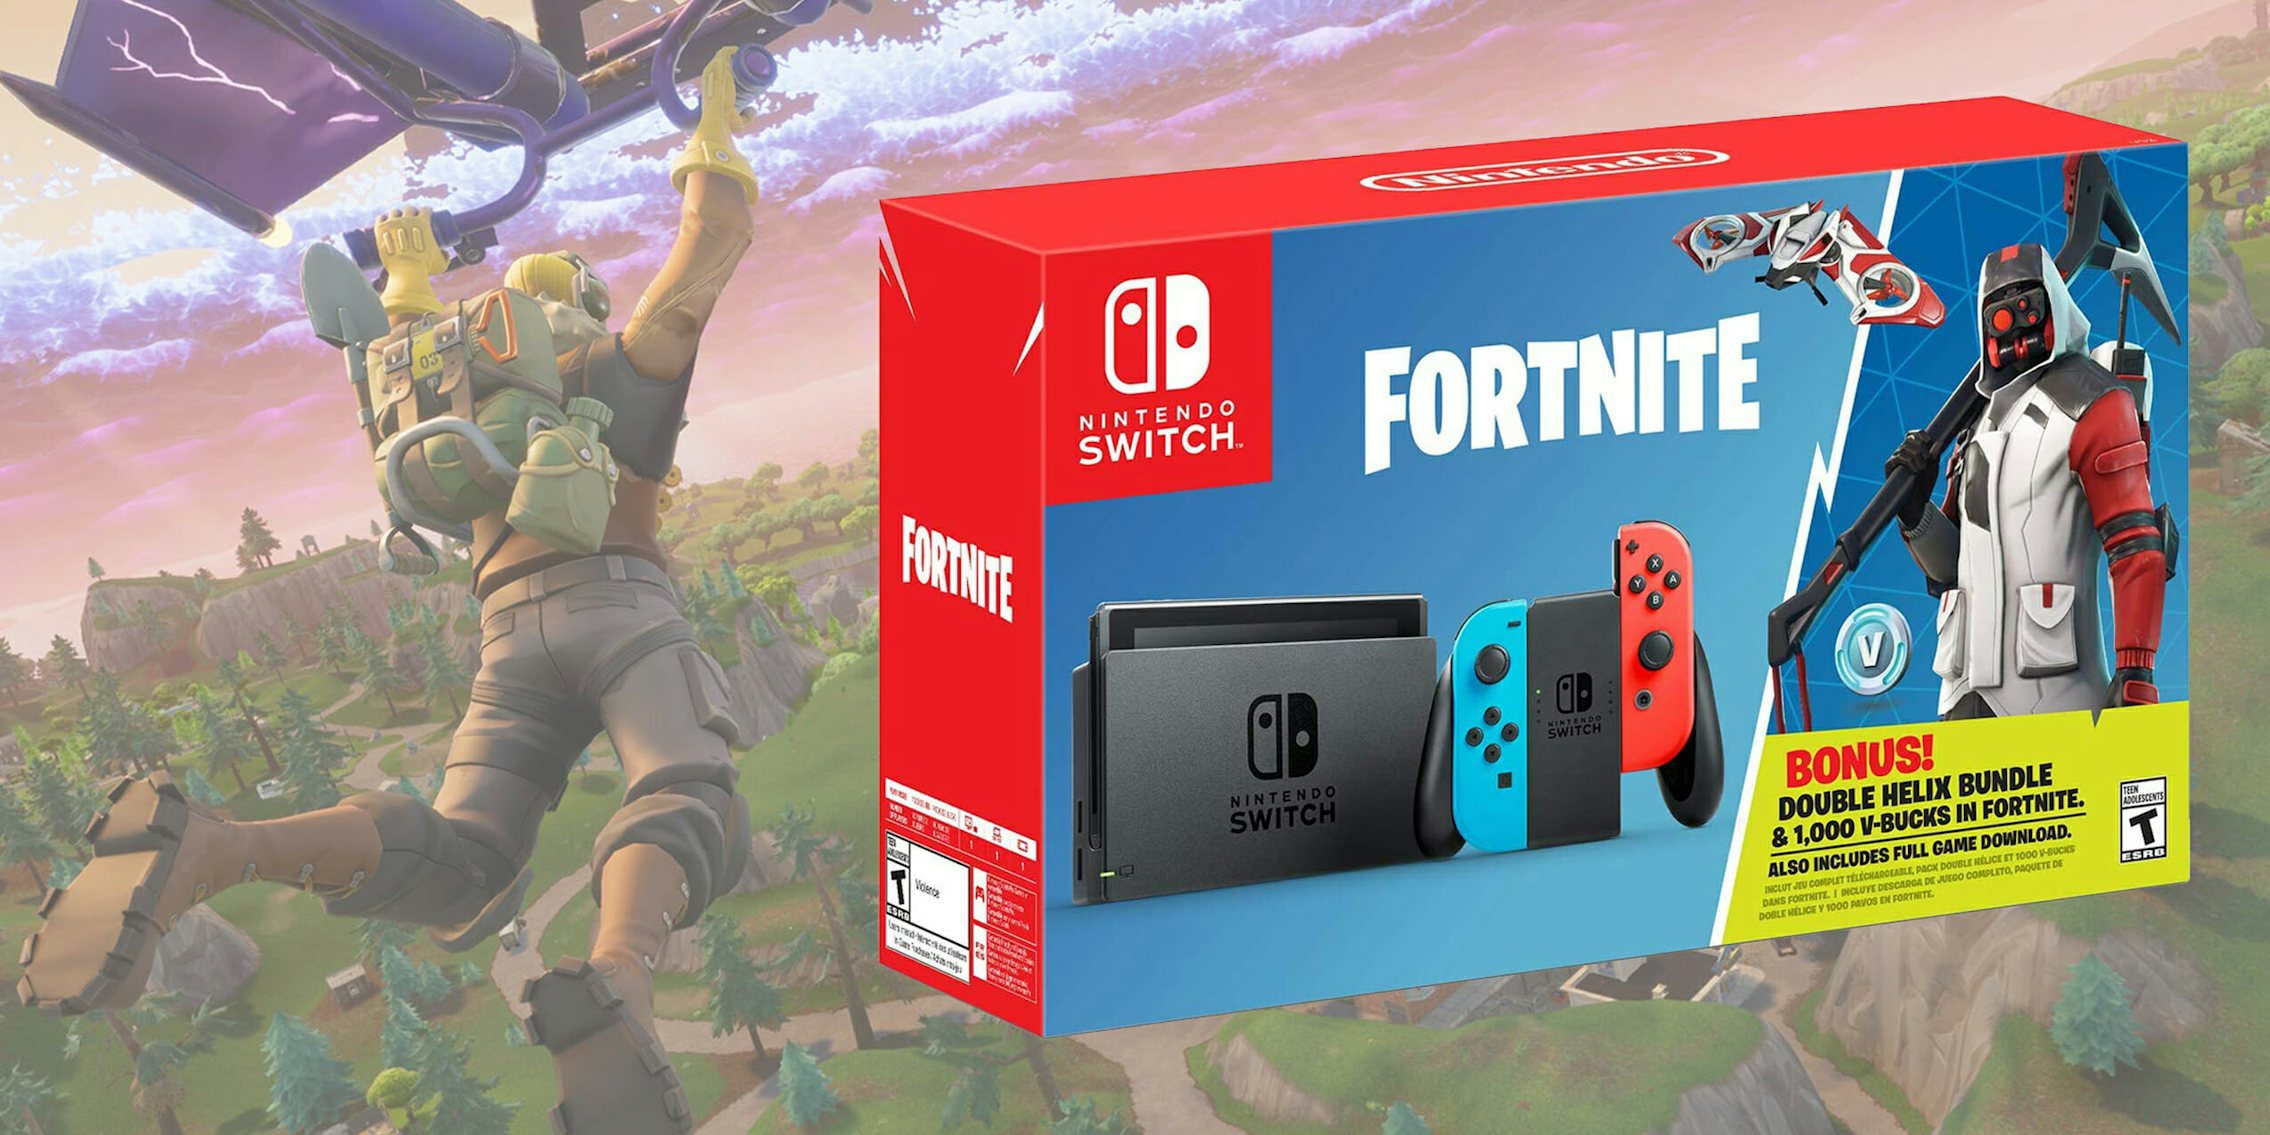 Here's How To Download And Play 'Fortnite' On Nintendo Switch